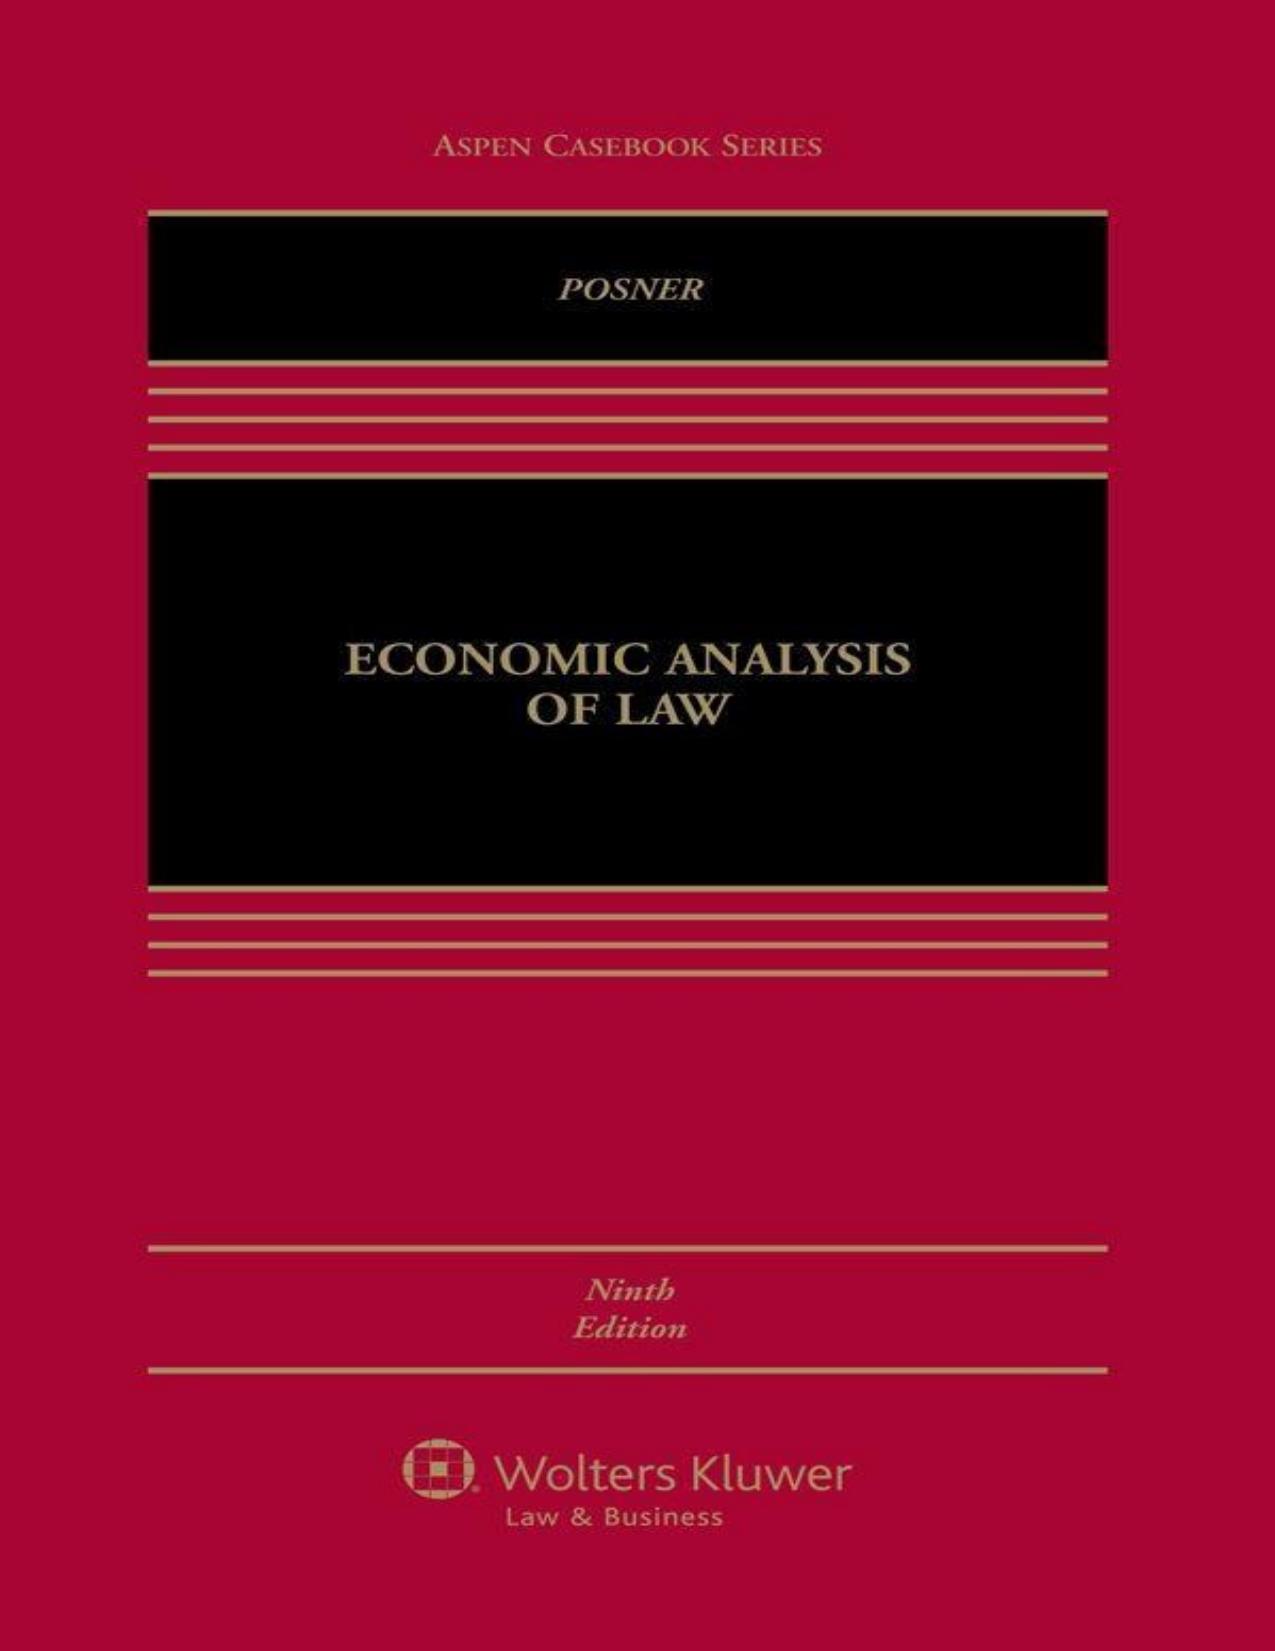 Numerical Analysis 10th Edition Pdf Download [PATCHED] Economic%20Analysis%20of%20Law%209th%20Edition%20by%20Richard%20-%20Richard%20A.%20Posner